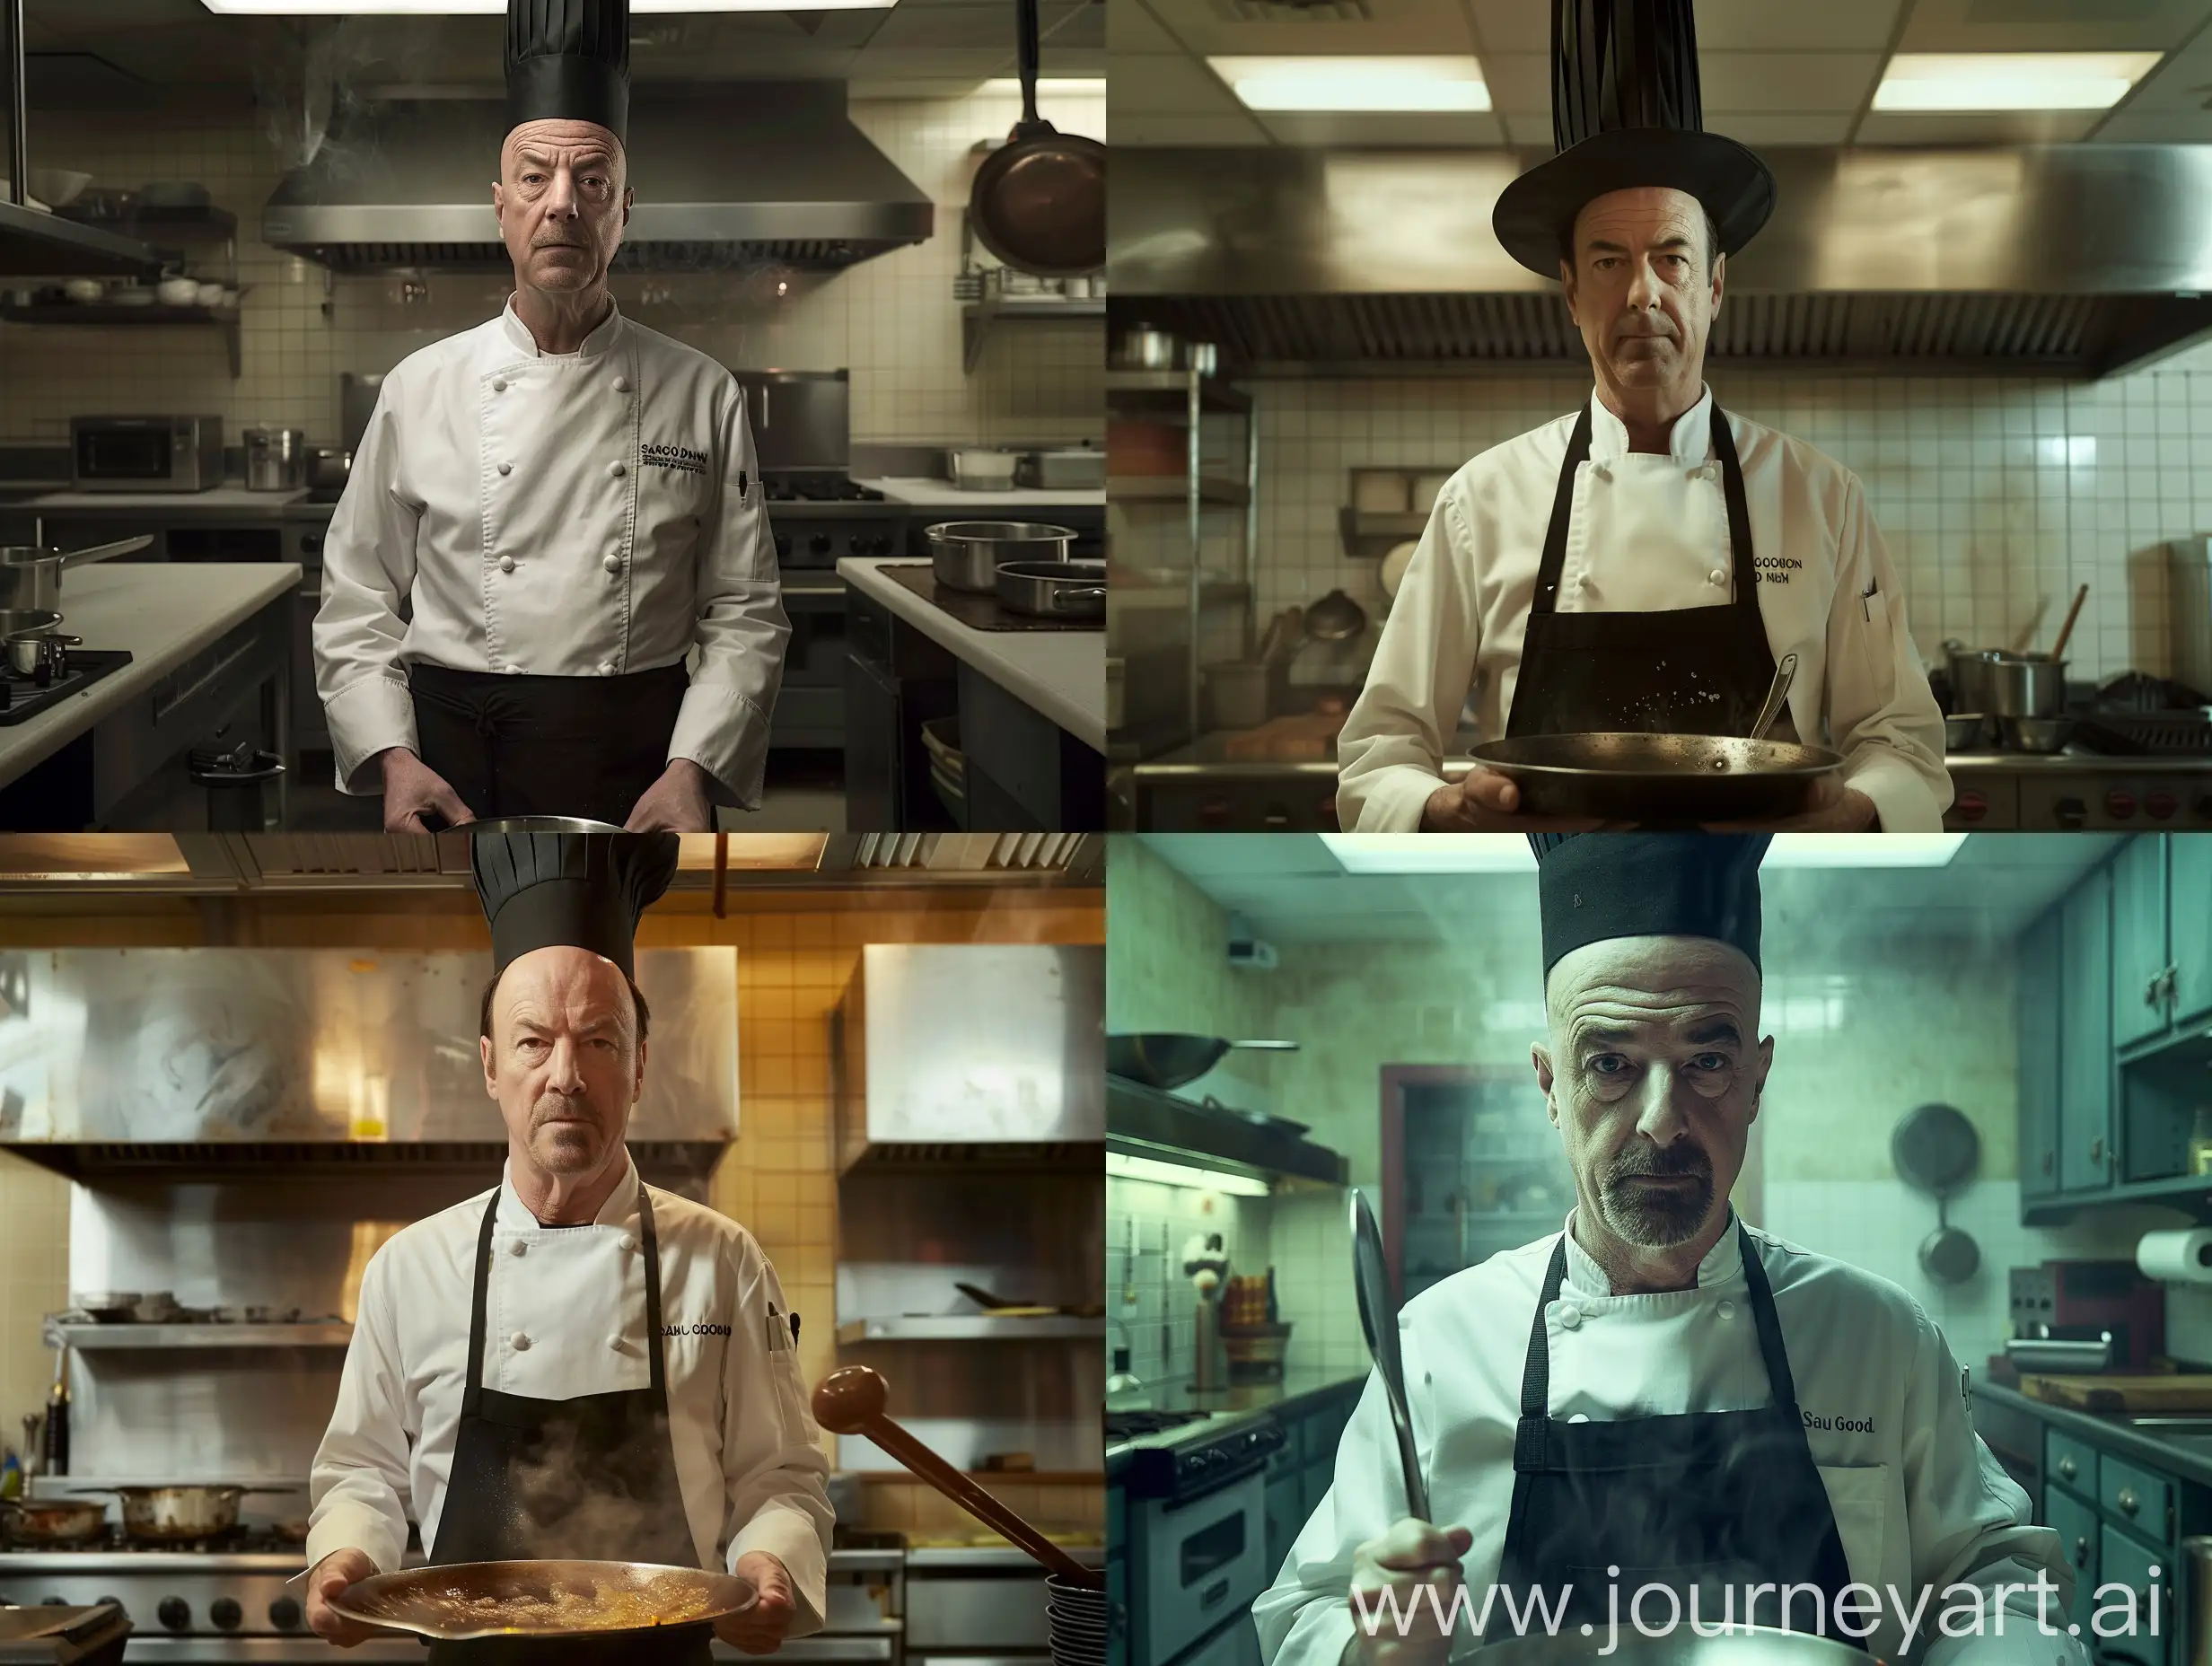 Saul Goodman (played by Bob Edenkirk) is bad in Breaking Bad, Saul Goodman (played by Bob Edenkirk) is wearing a white chef's suit, Saul Goodman (played by Bob Edenkirk) is wearing a black kitchen apron, Saul Goodman is wearing a tall black chef's hat, Saul Gud Man has a wide ladle in his hand, the background of the kitchen, Saul's face is neither happy nor sad, modern lighting, very clear, very realistic, very high quality image,q2


